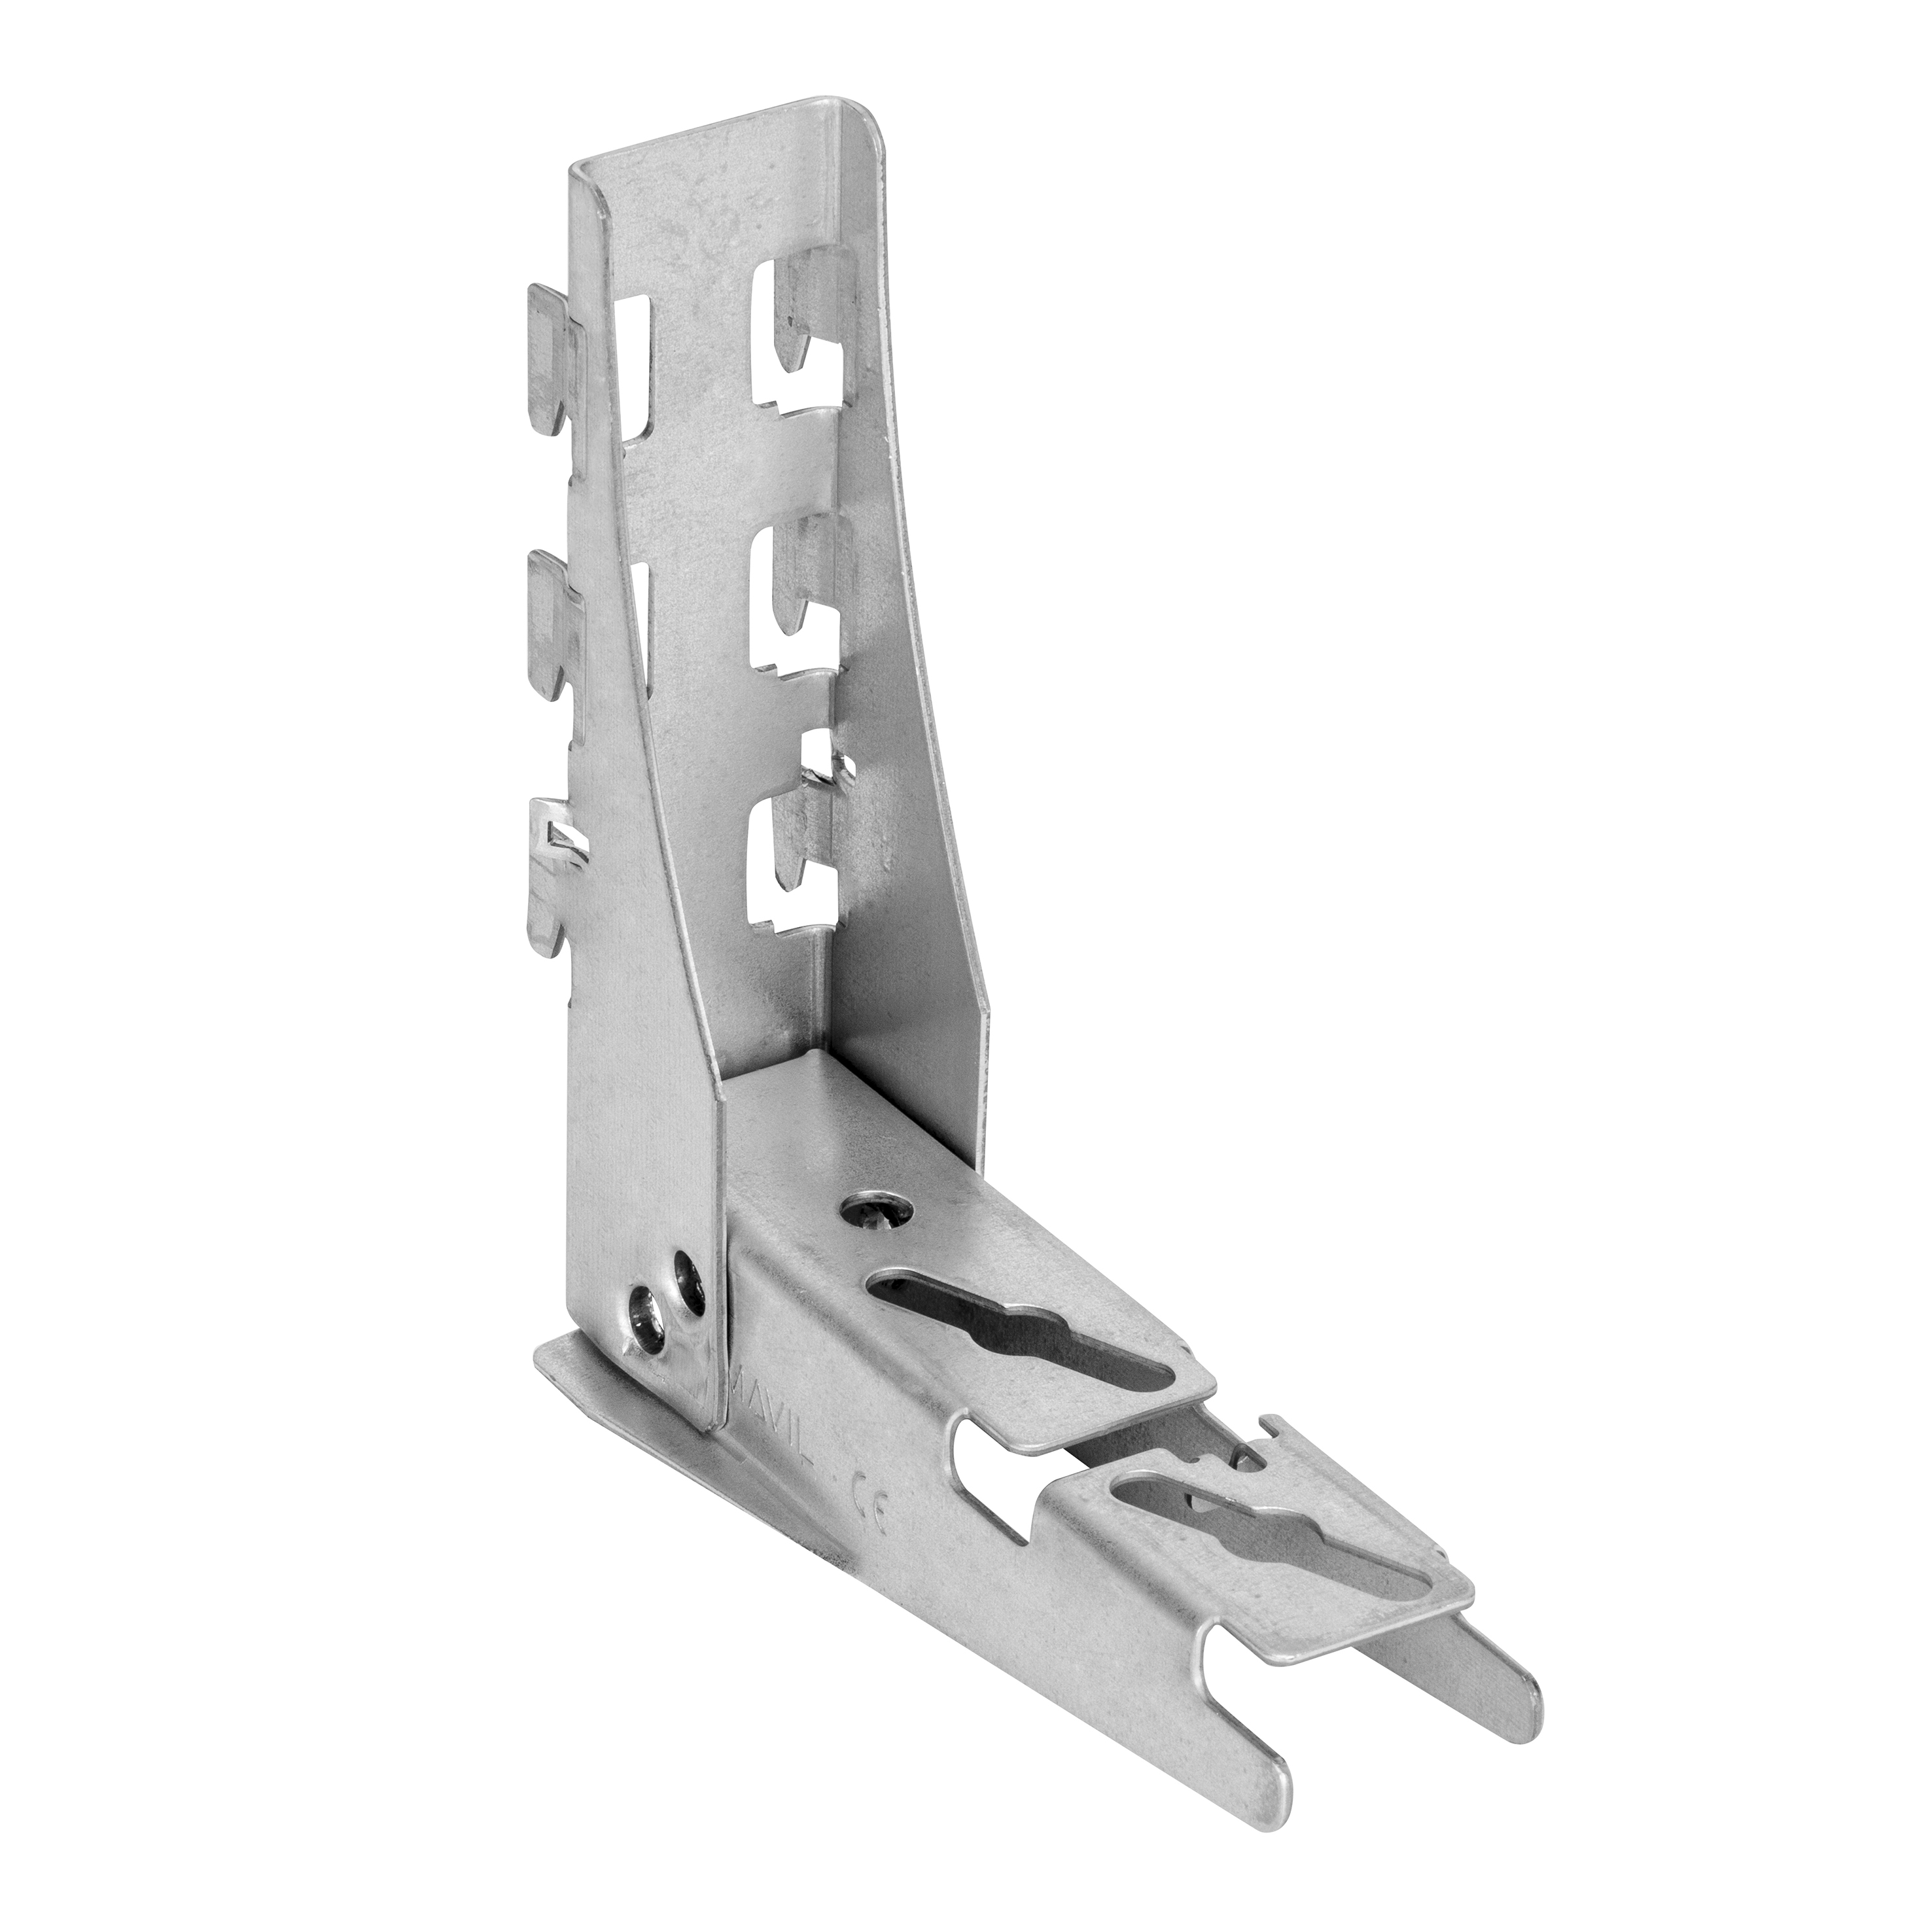 Bracket support - SP series - GEWISS - for cables / electric